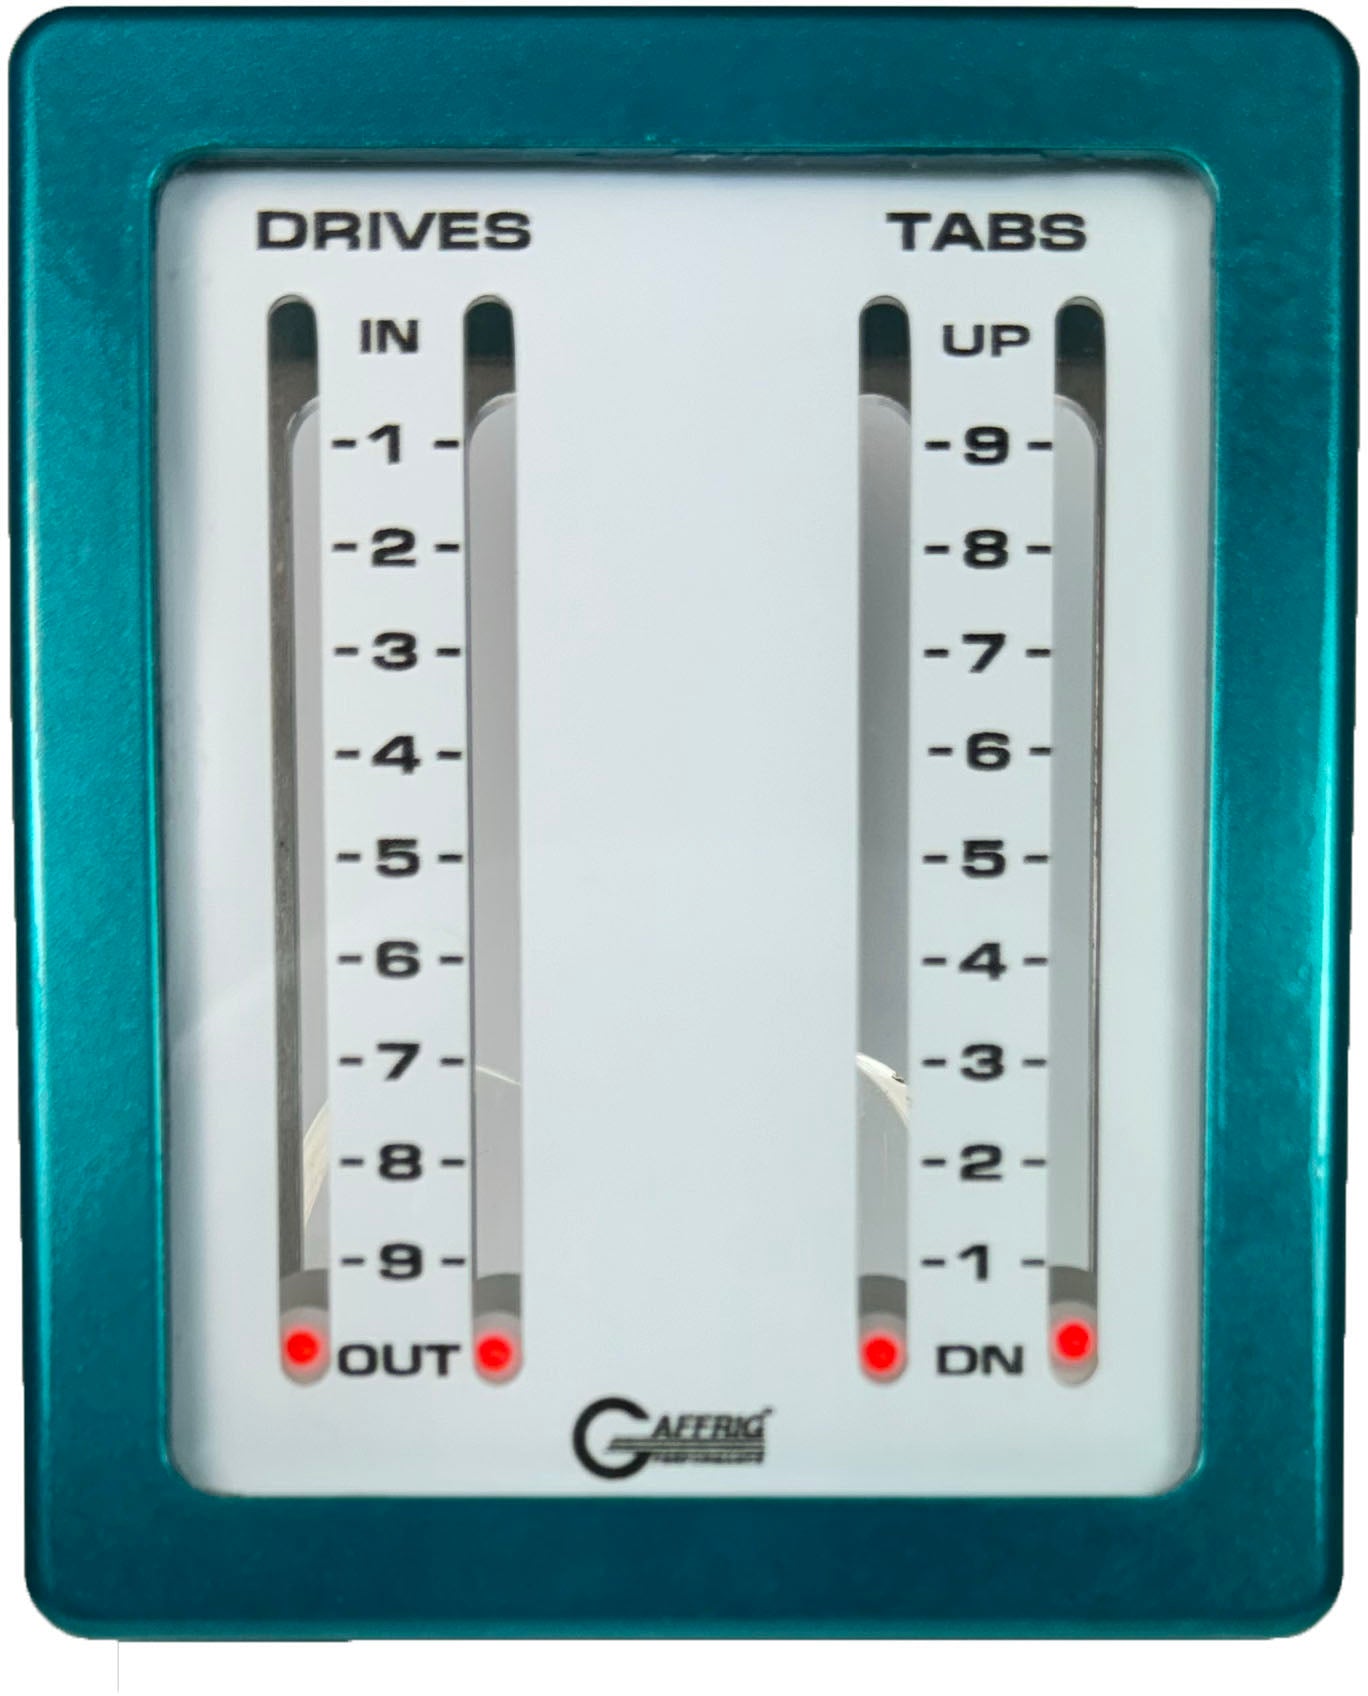 GAFFRIG PART #205 MECHANICAL INDICATOR, 2 DRIVES/2 TABS, MERCURY- CARD - WHITE DIAL TEAL